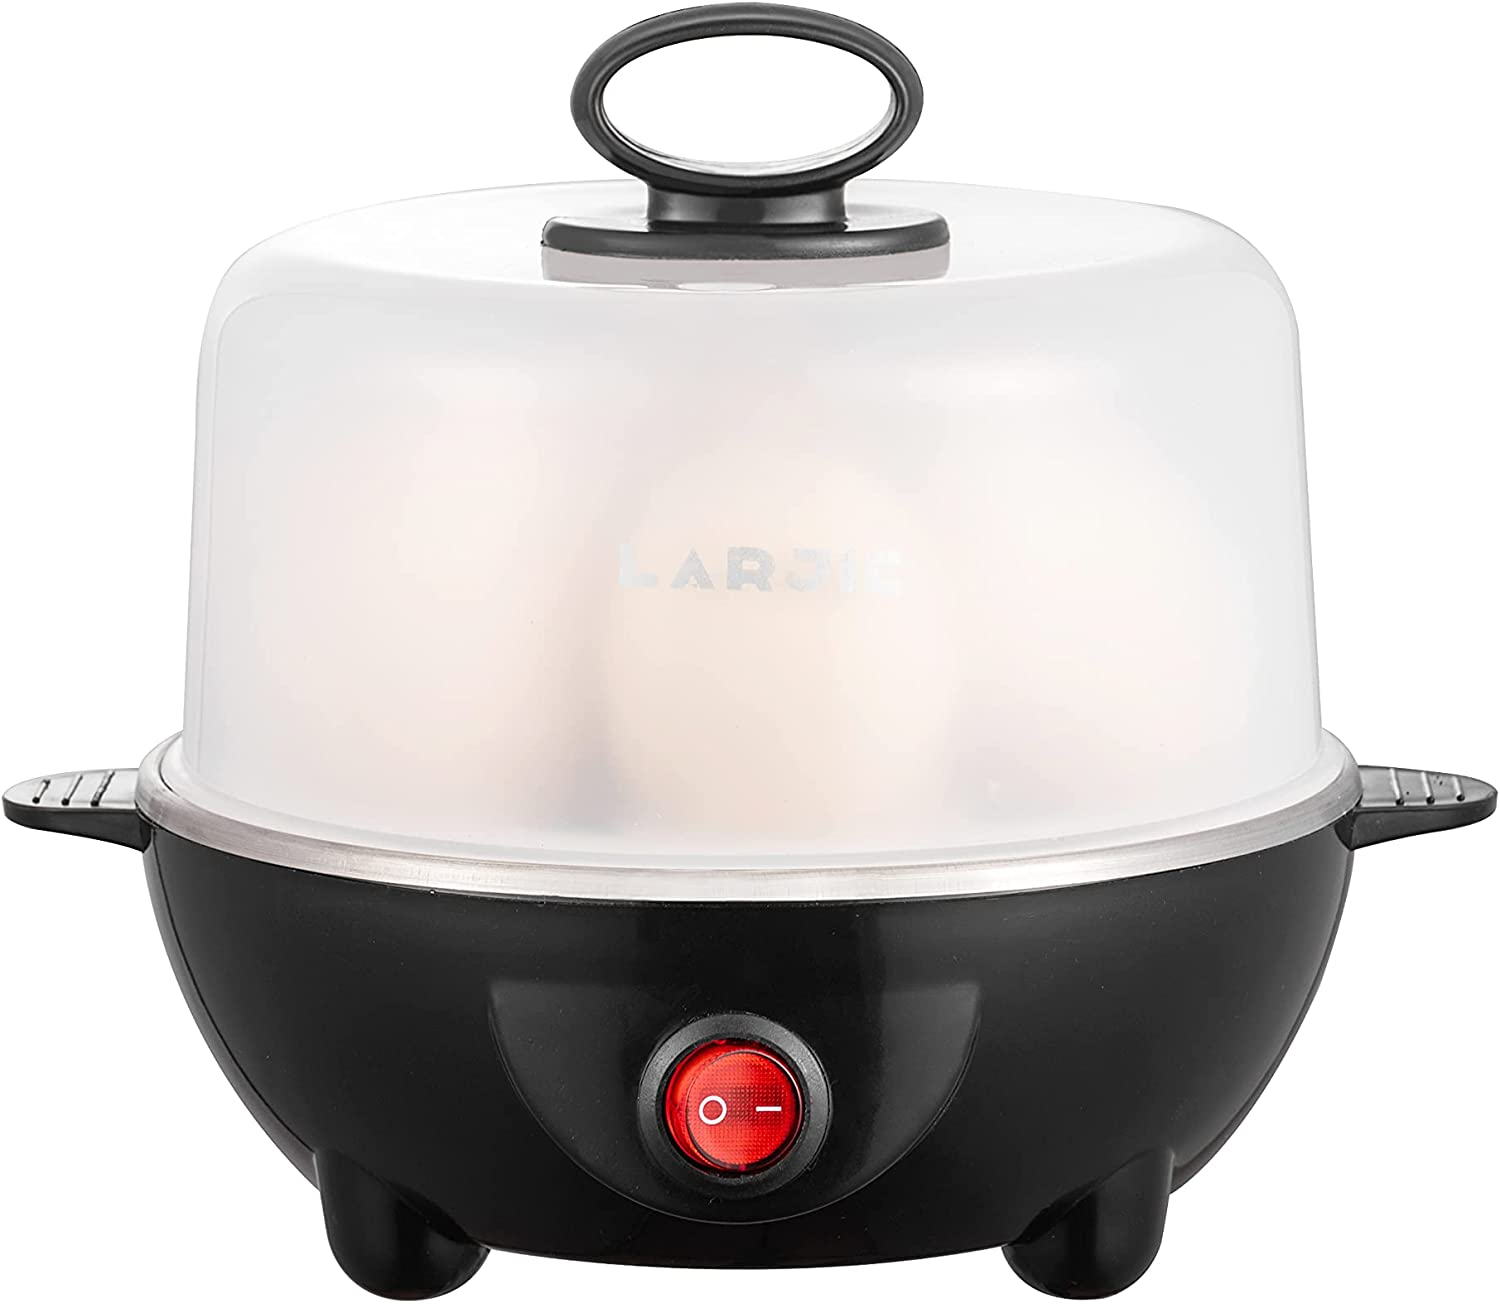 Electric Egg Boiler Cooker Rapid Poacher 1 or 7 Capacity Soft Medium Hard Boiled or Poached for Hard Boiled Scrambled Eggs or Omelets Steamed Vegetables Seafood W/Auto Shut off Feature Black